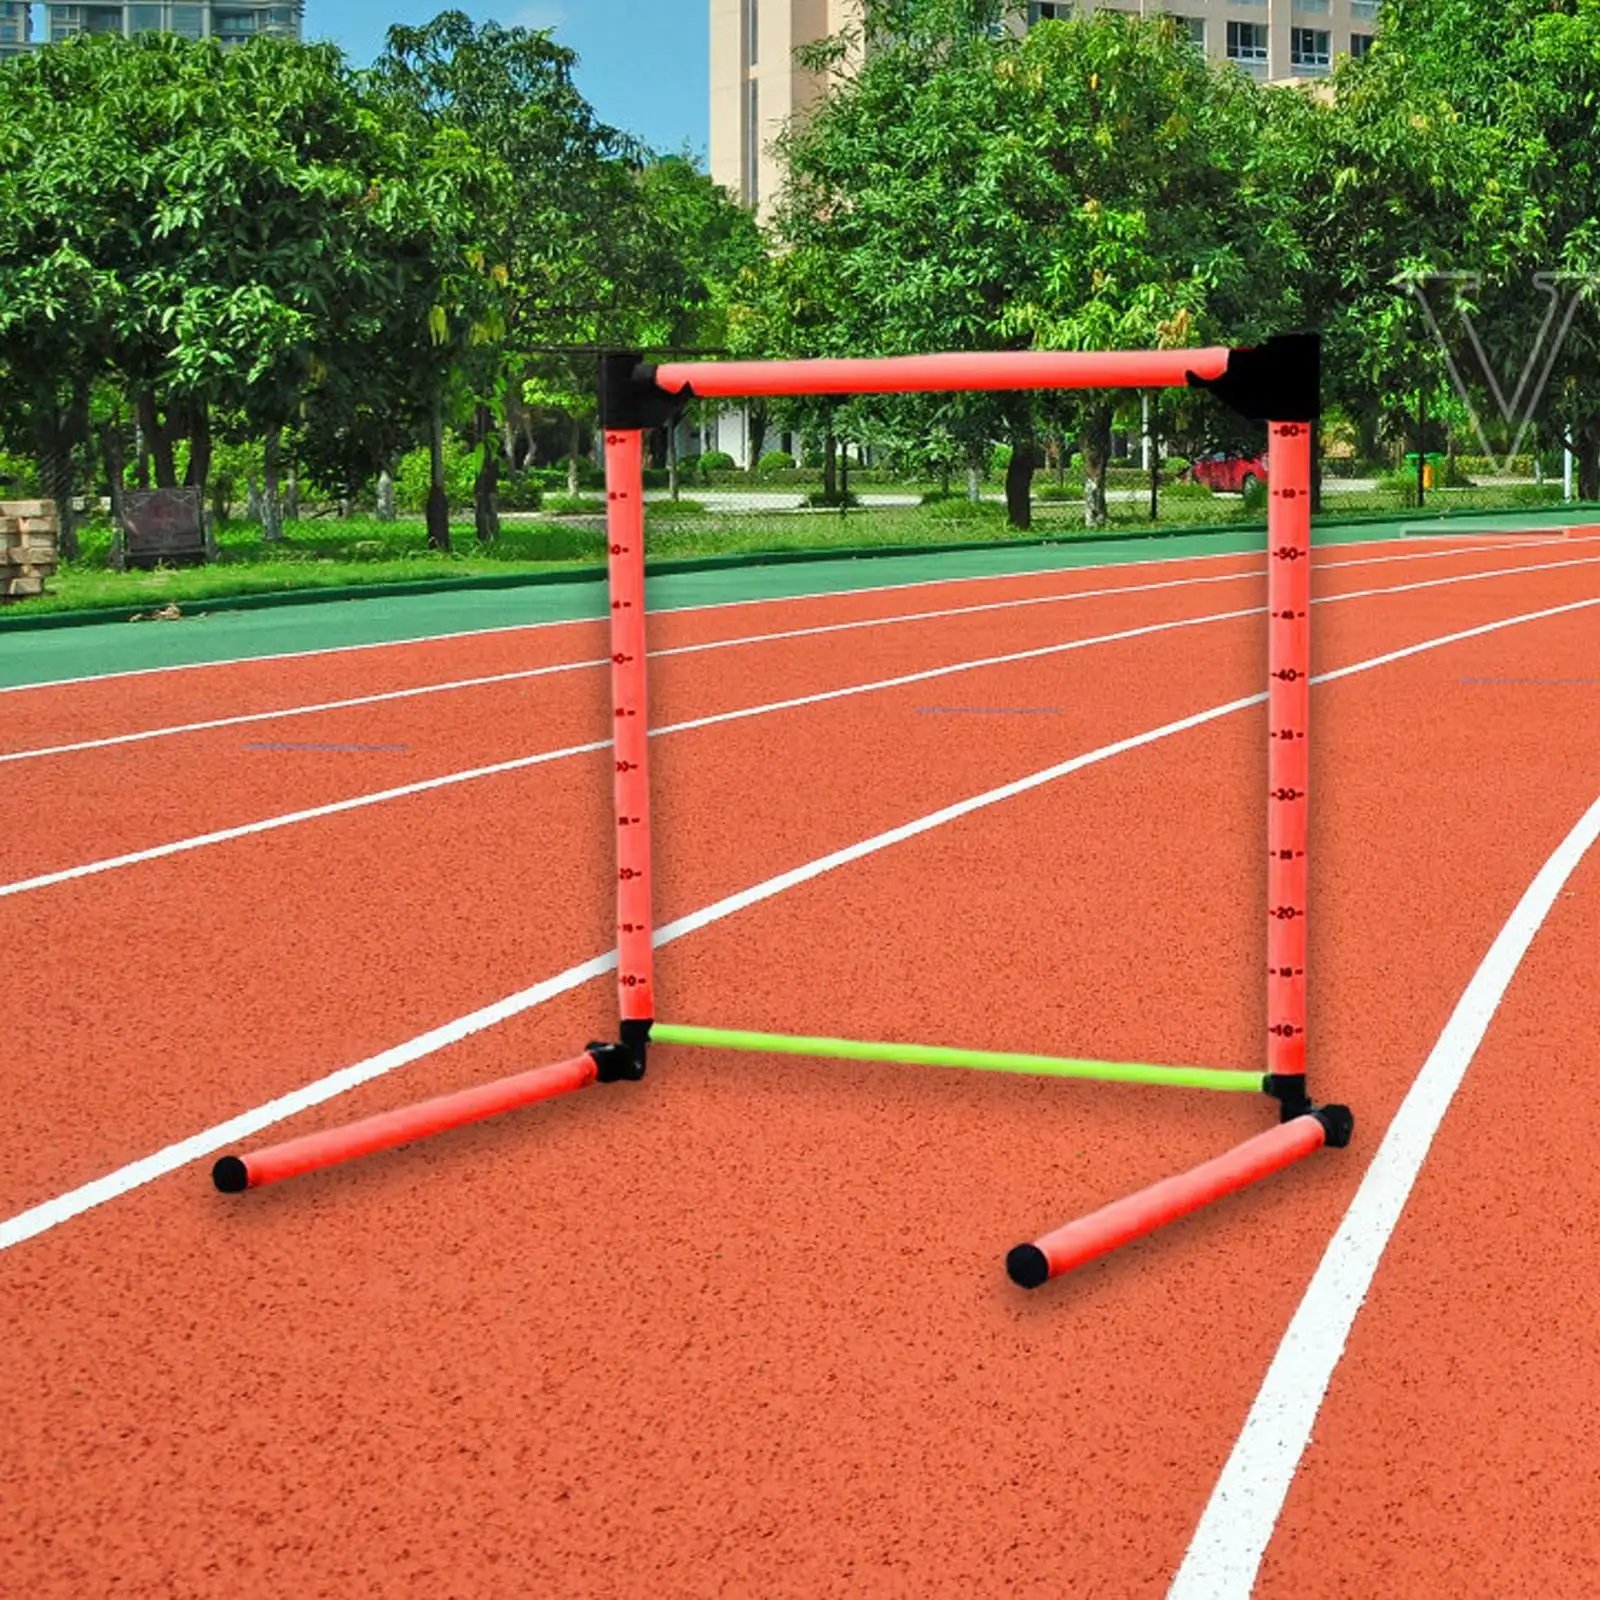 Agility Hurdles Obstacles Adjustable Scale Speed and Agility Training Equipment for Athletes Football Basketball Soccer Running